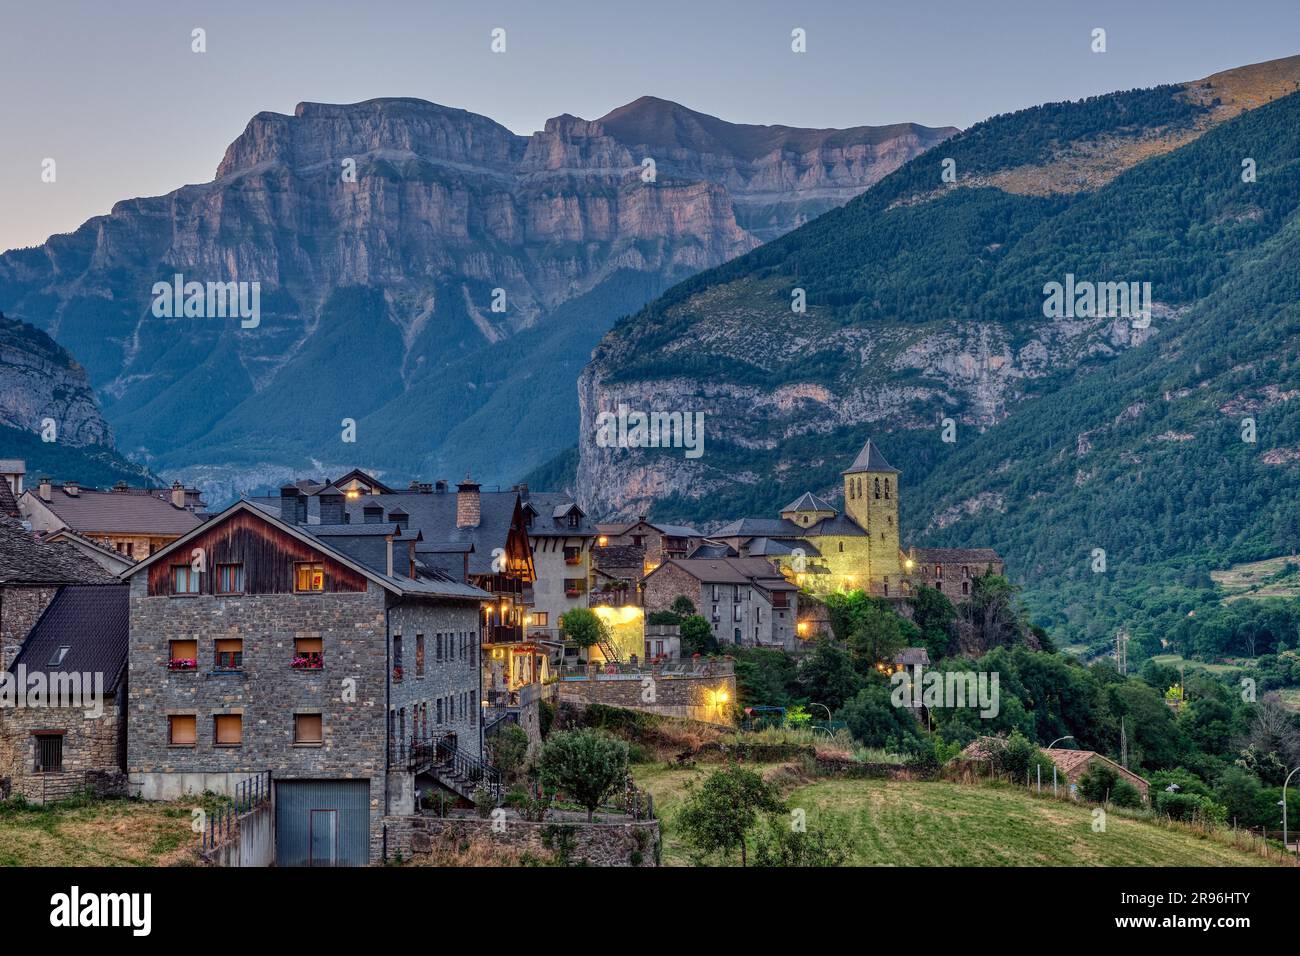 The beautiful village of Torla in the Spanish Pyrenees by night Stock Photo